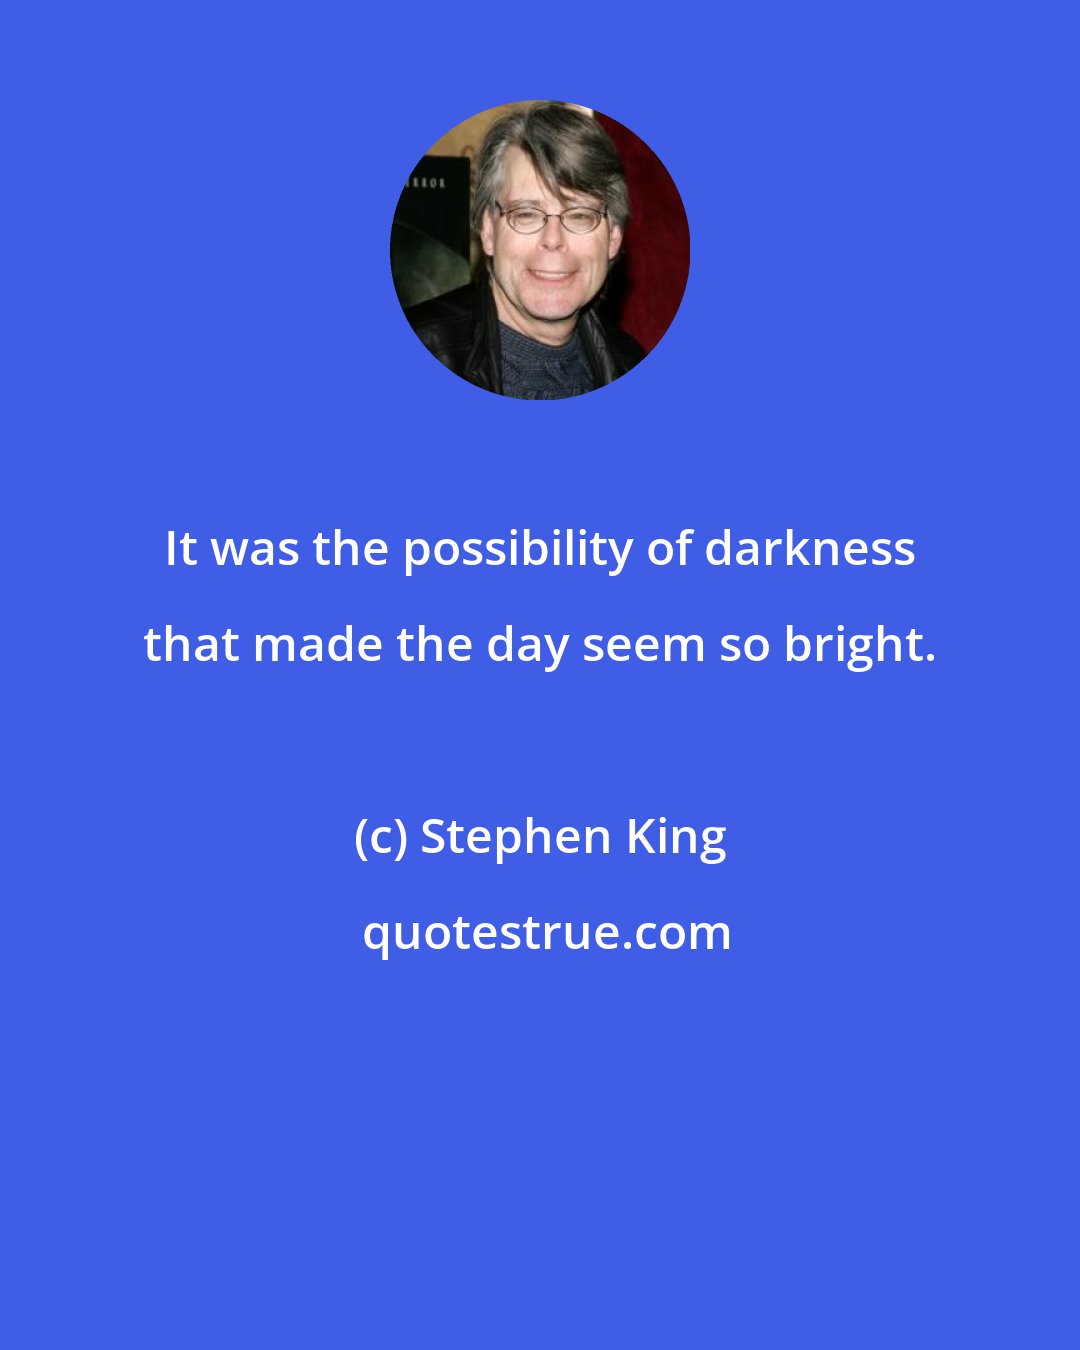 Stephen King: It was the possibility of darkness that made the day seem so bright.